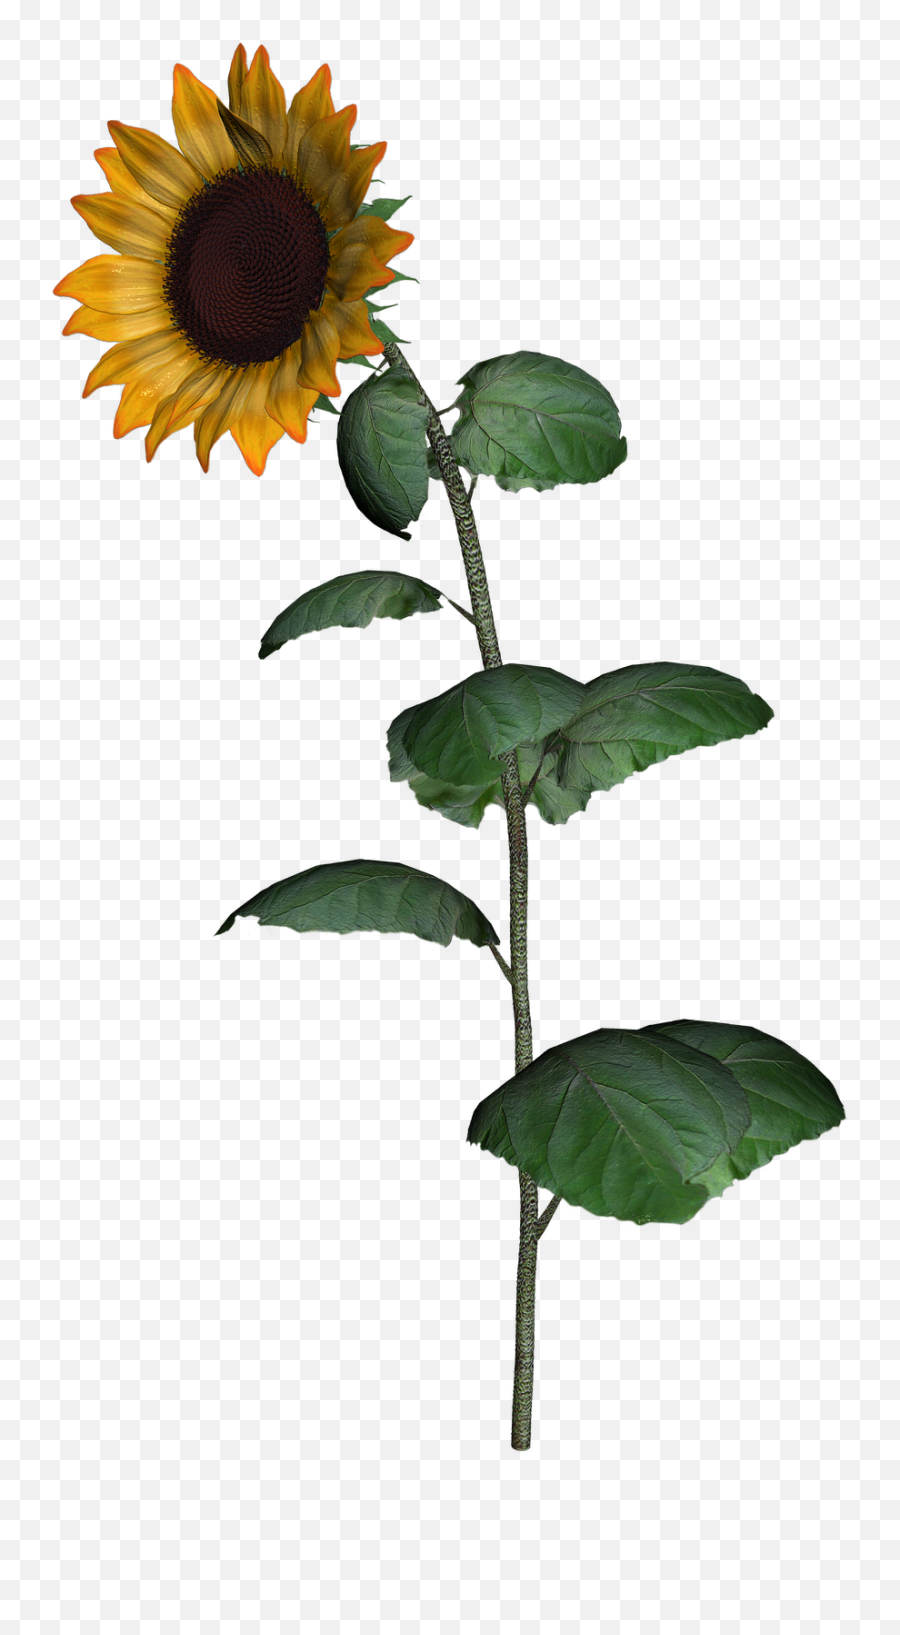 Sunflower Clipart With Leaf Png Images Transparent Png - Transparent Background Sunflower Img Emoji,Sunflower Clipart